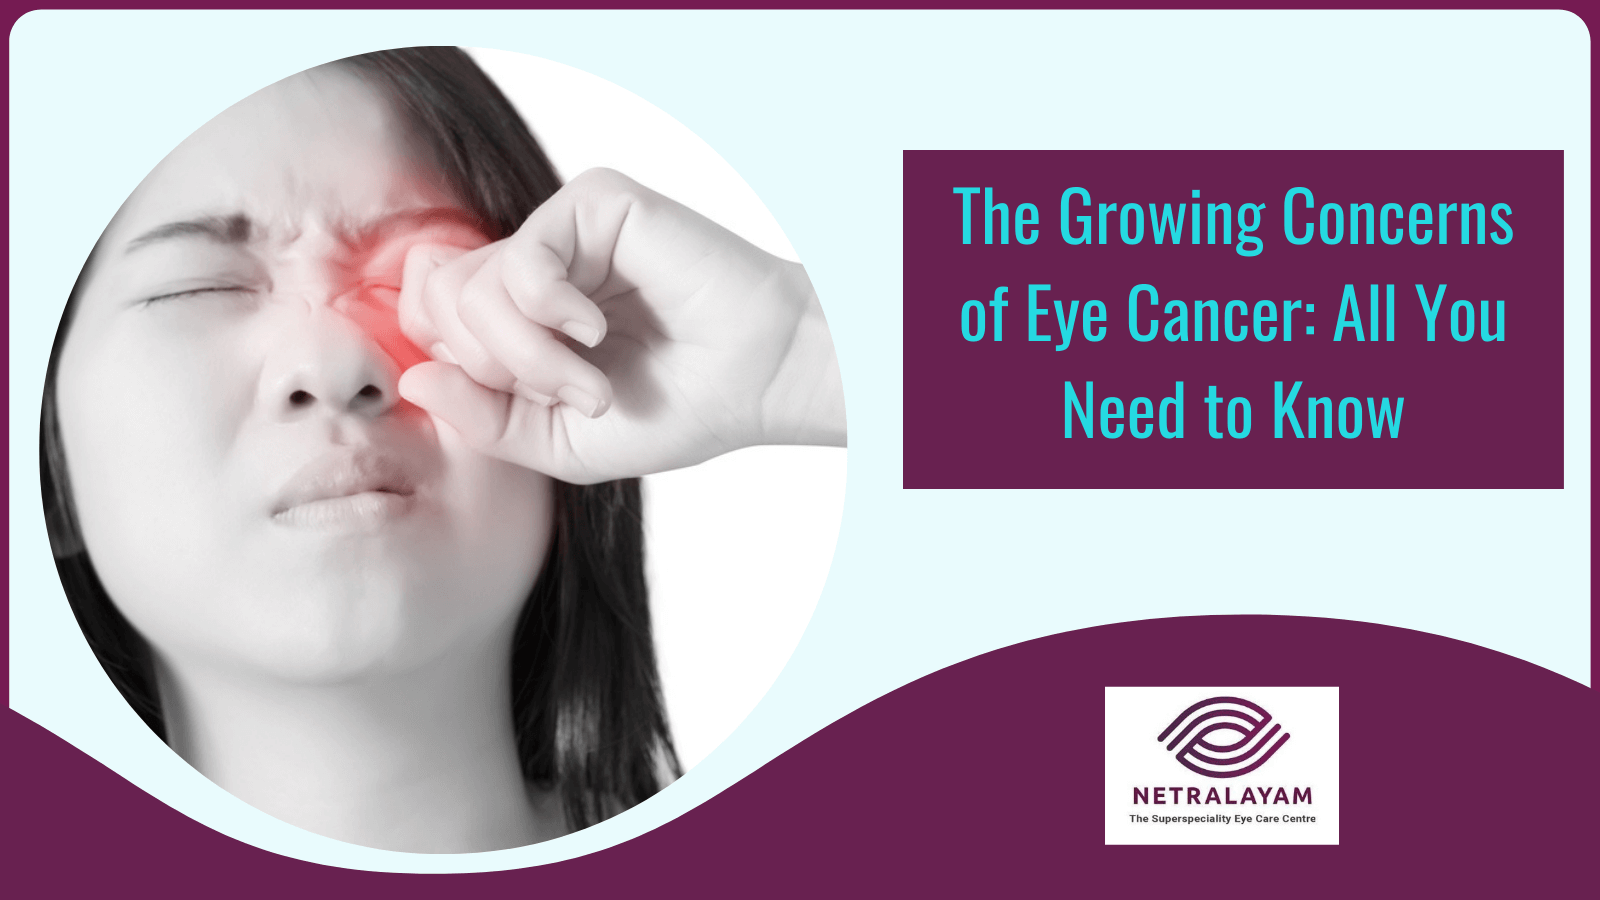 The Growing Concerns of Eye Cancer: All You Need to Know